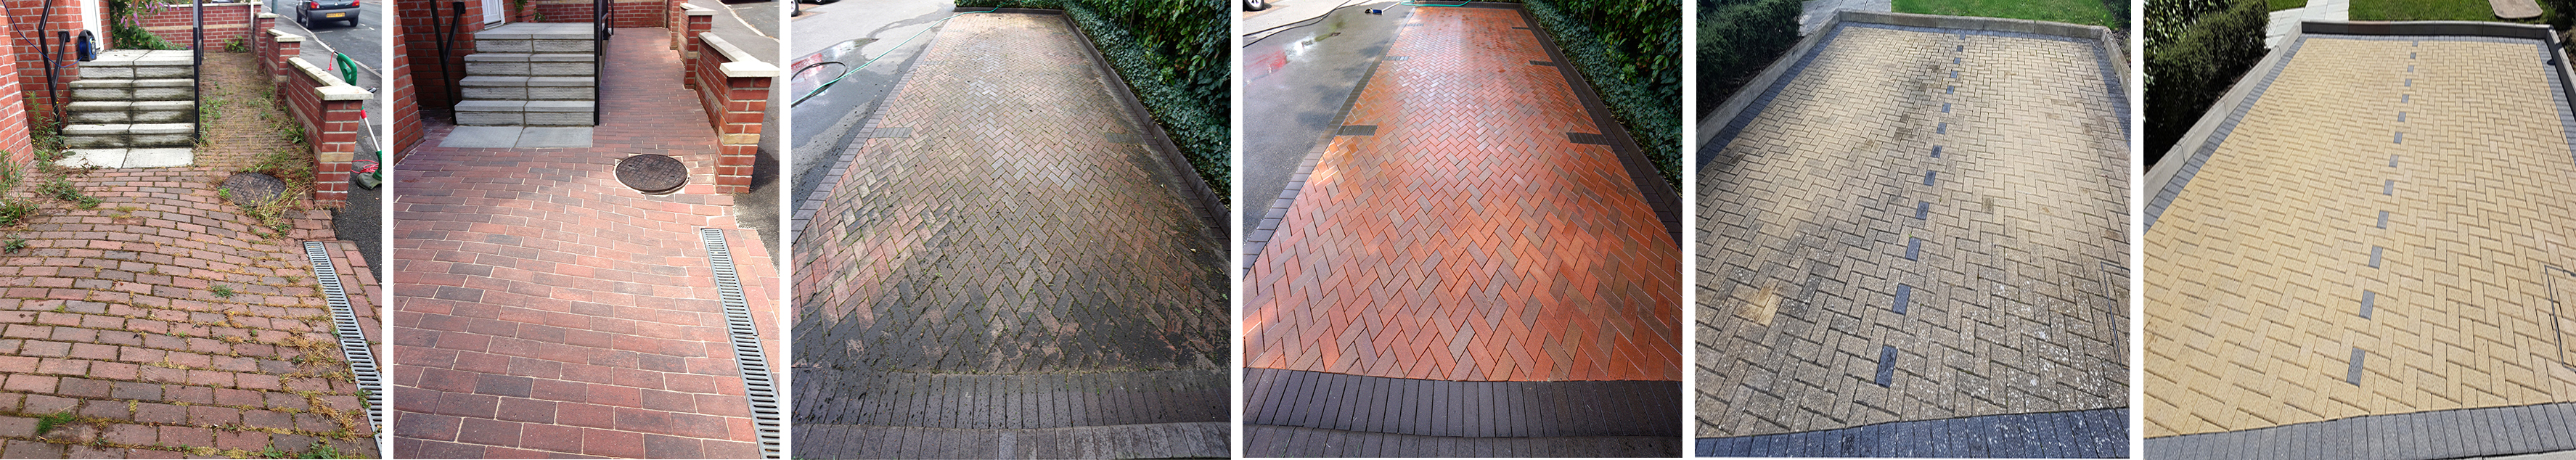 Driveway Cleaning Services in Christchurch, Dorset